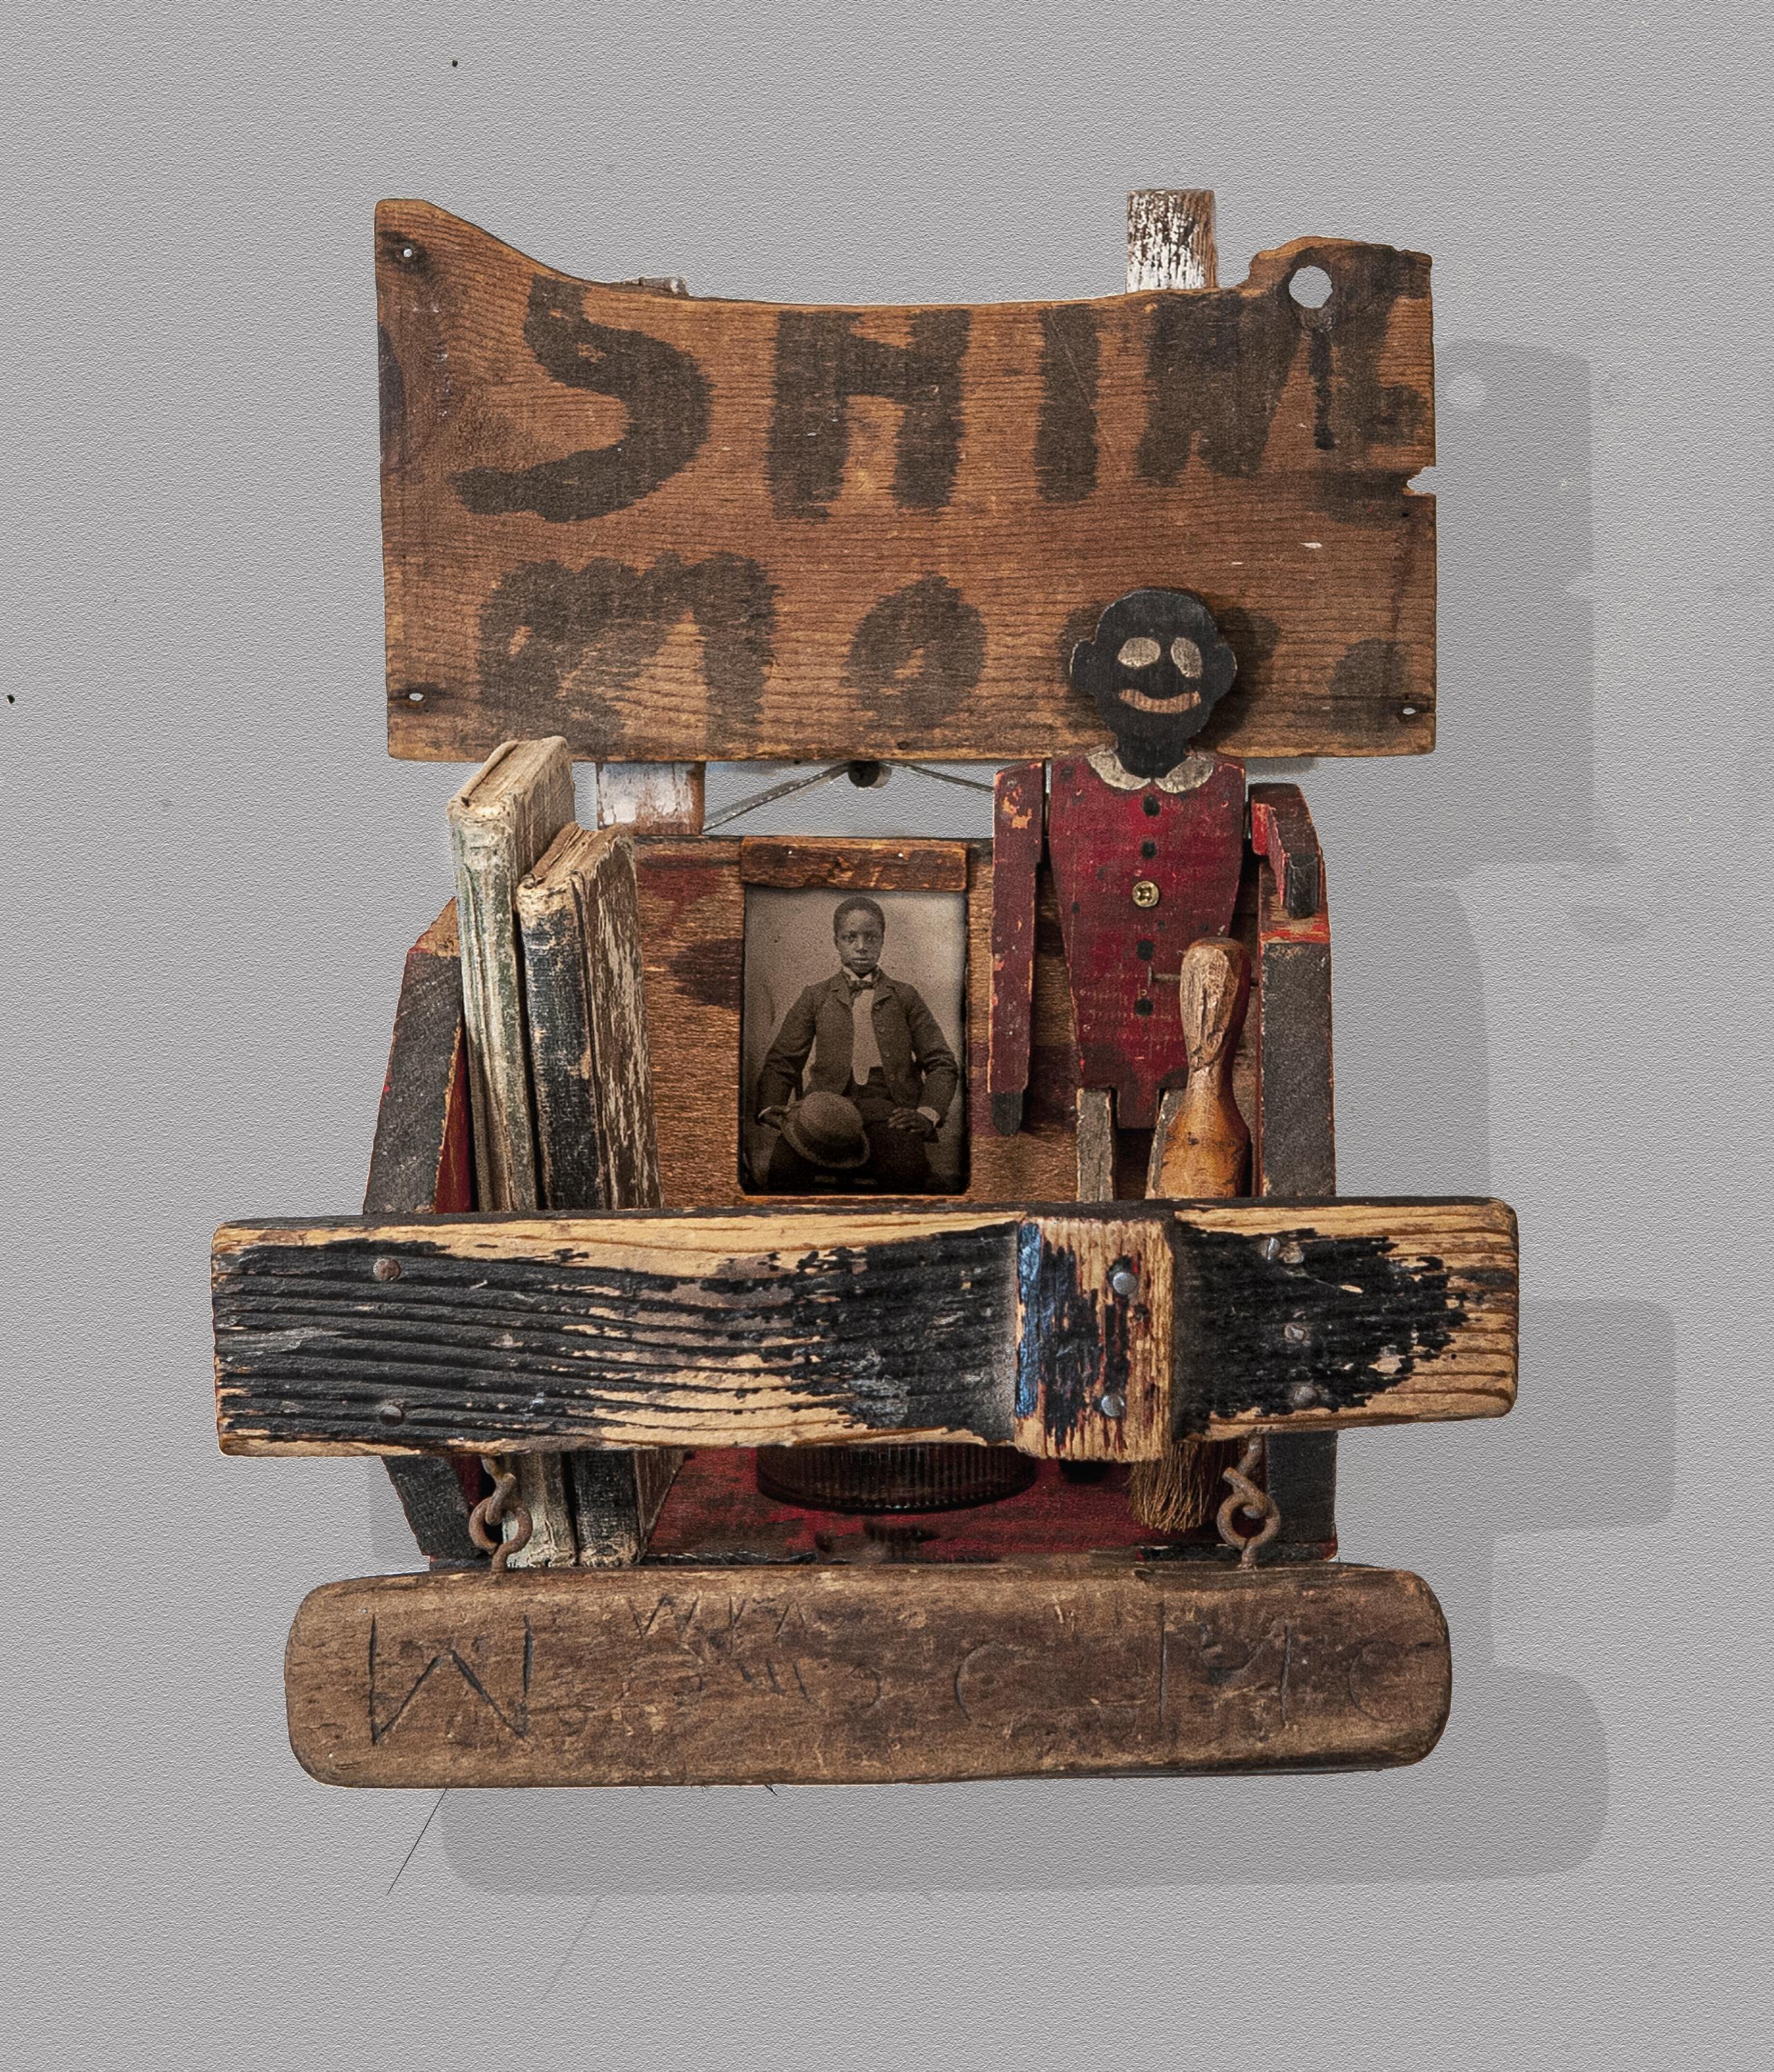 assemblage sculpture: Antique homemade shoeshine box, antique brush with hand-carved initials, small hand brush, handmade & painted 